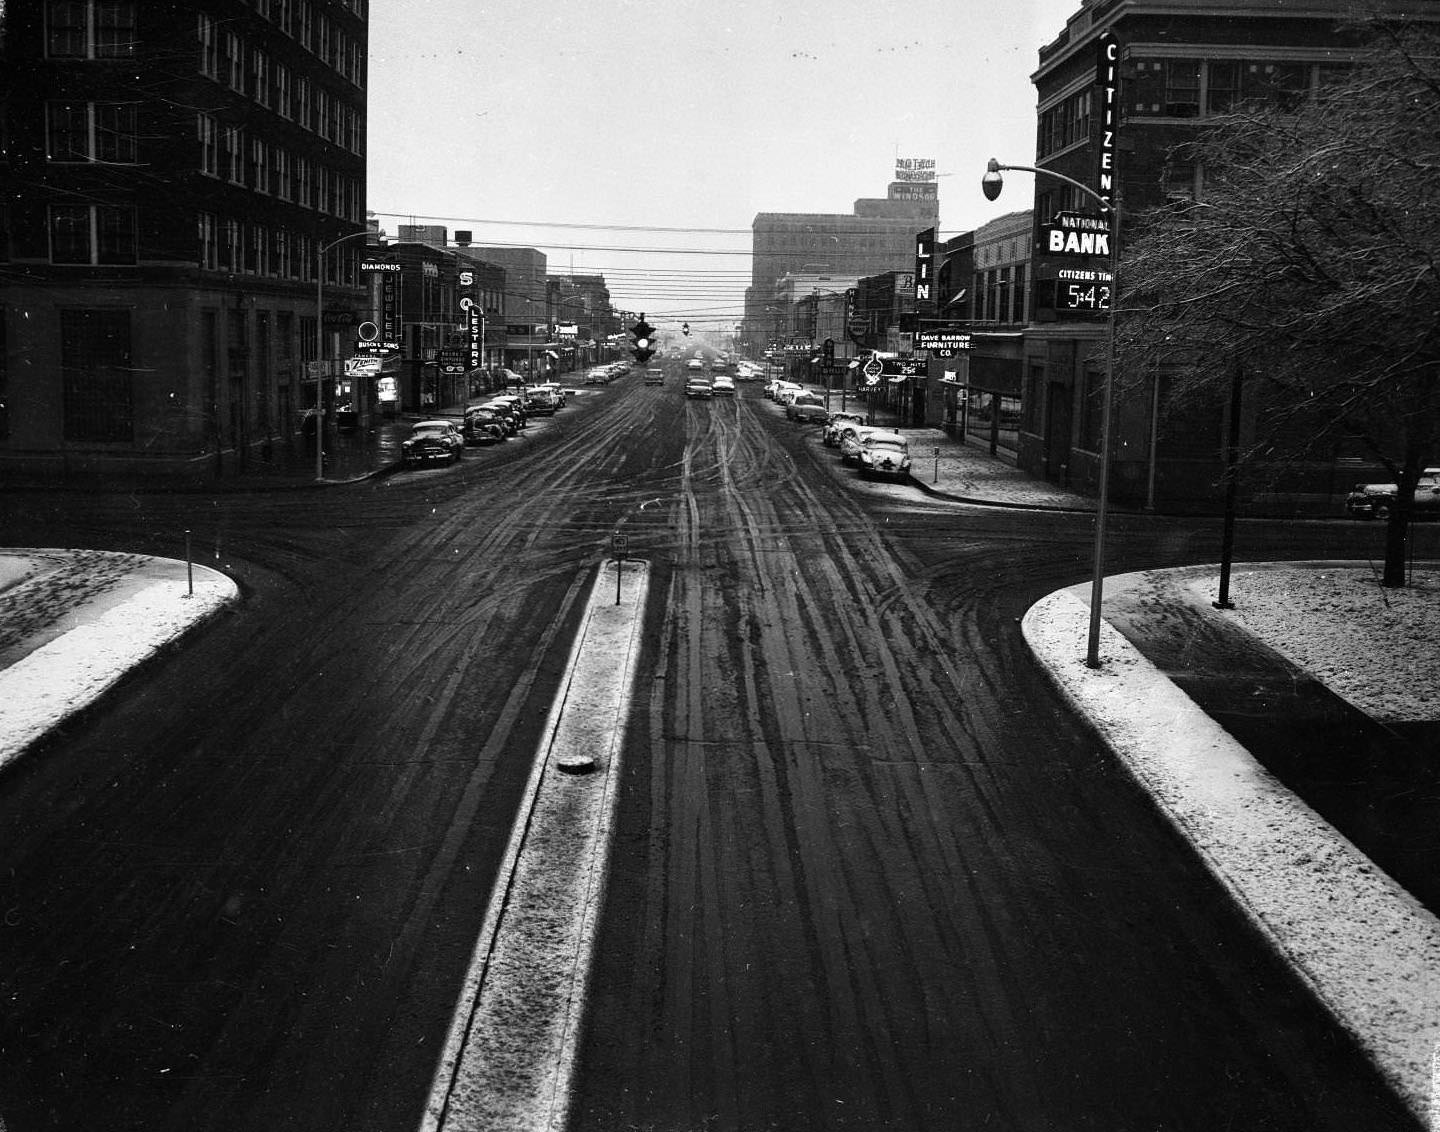 Part of the Abilene downtown after it has snowed, 1959